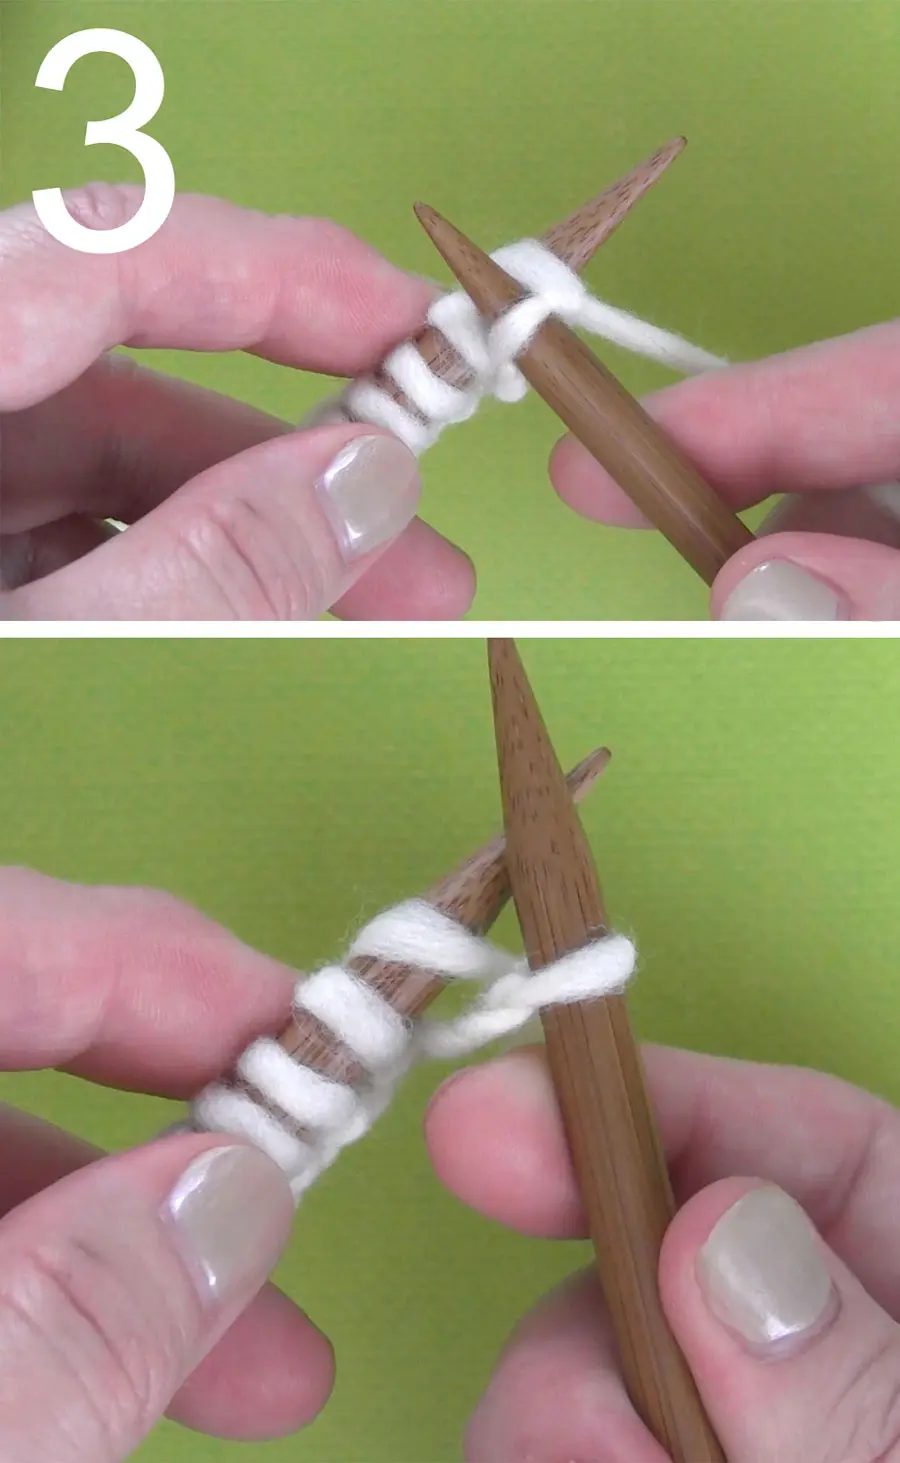 How to Knit STEP 3: Slide right needle with yarn on it